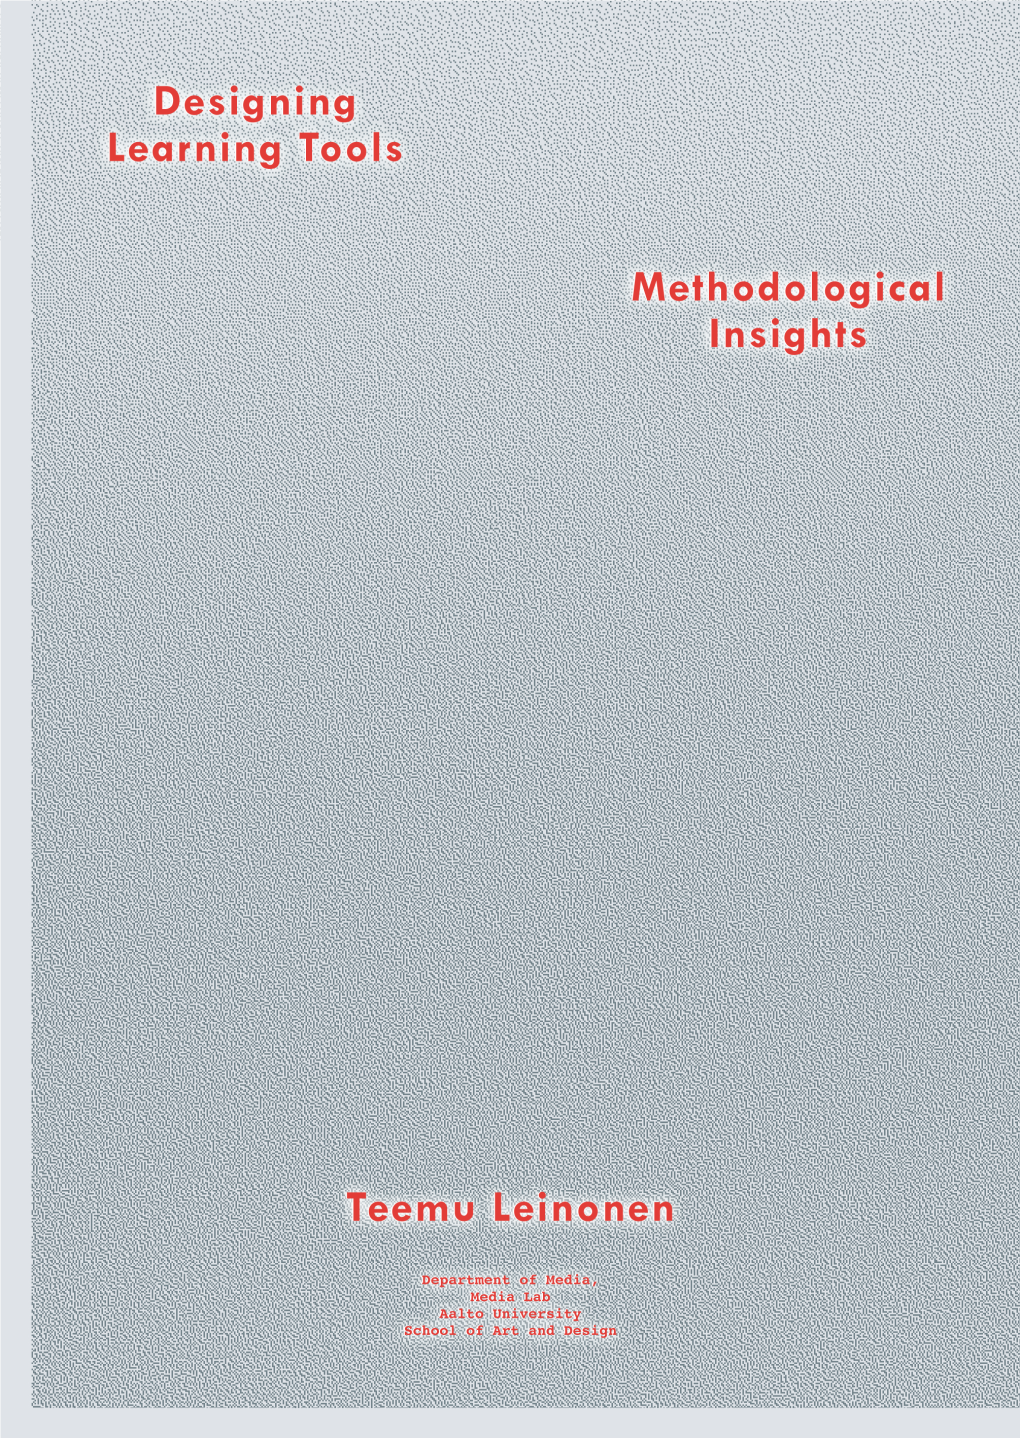 Designing Learning Tools Methodological Insights